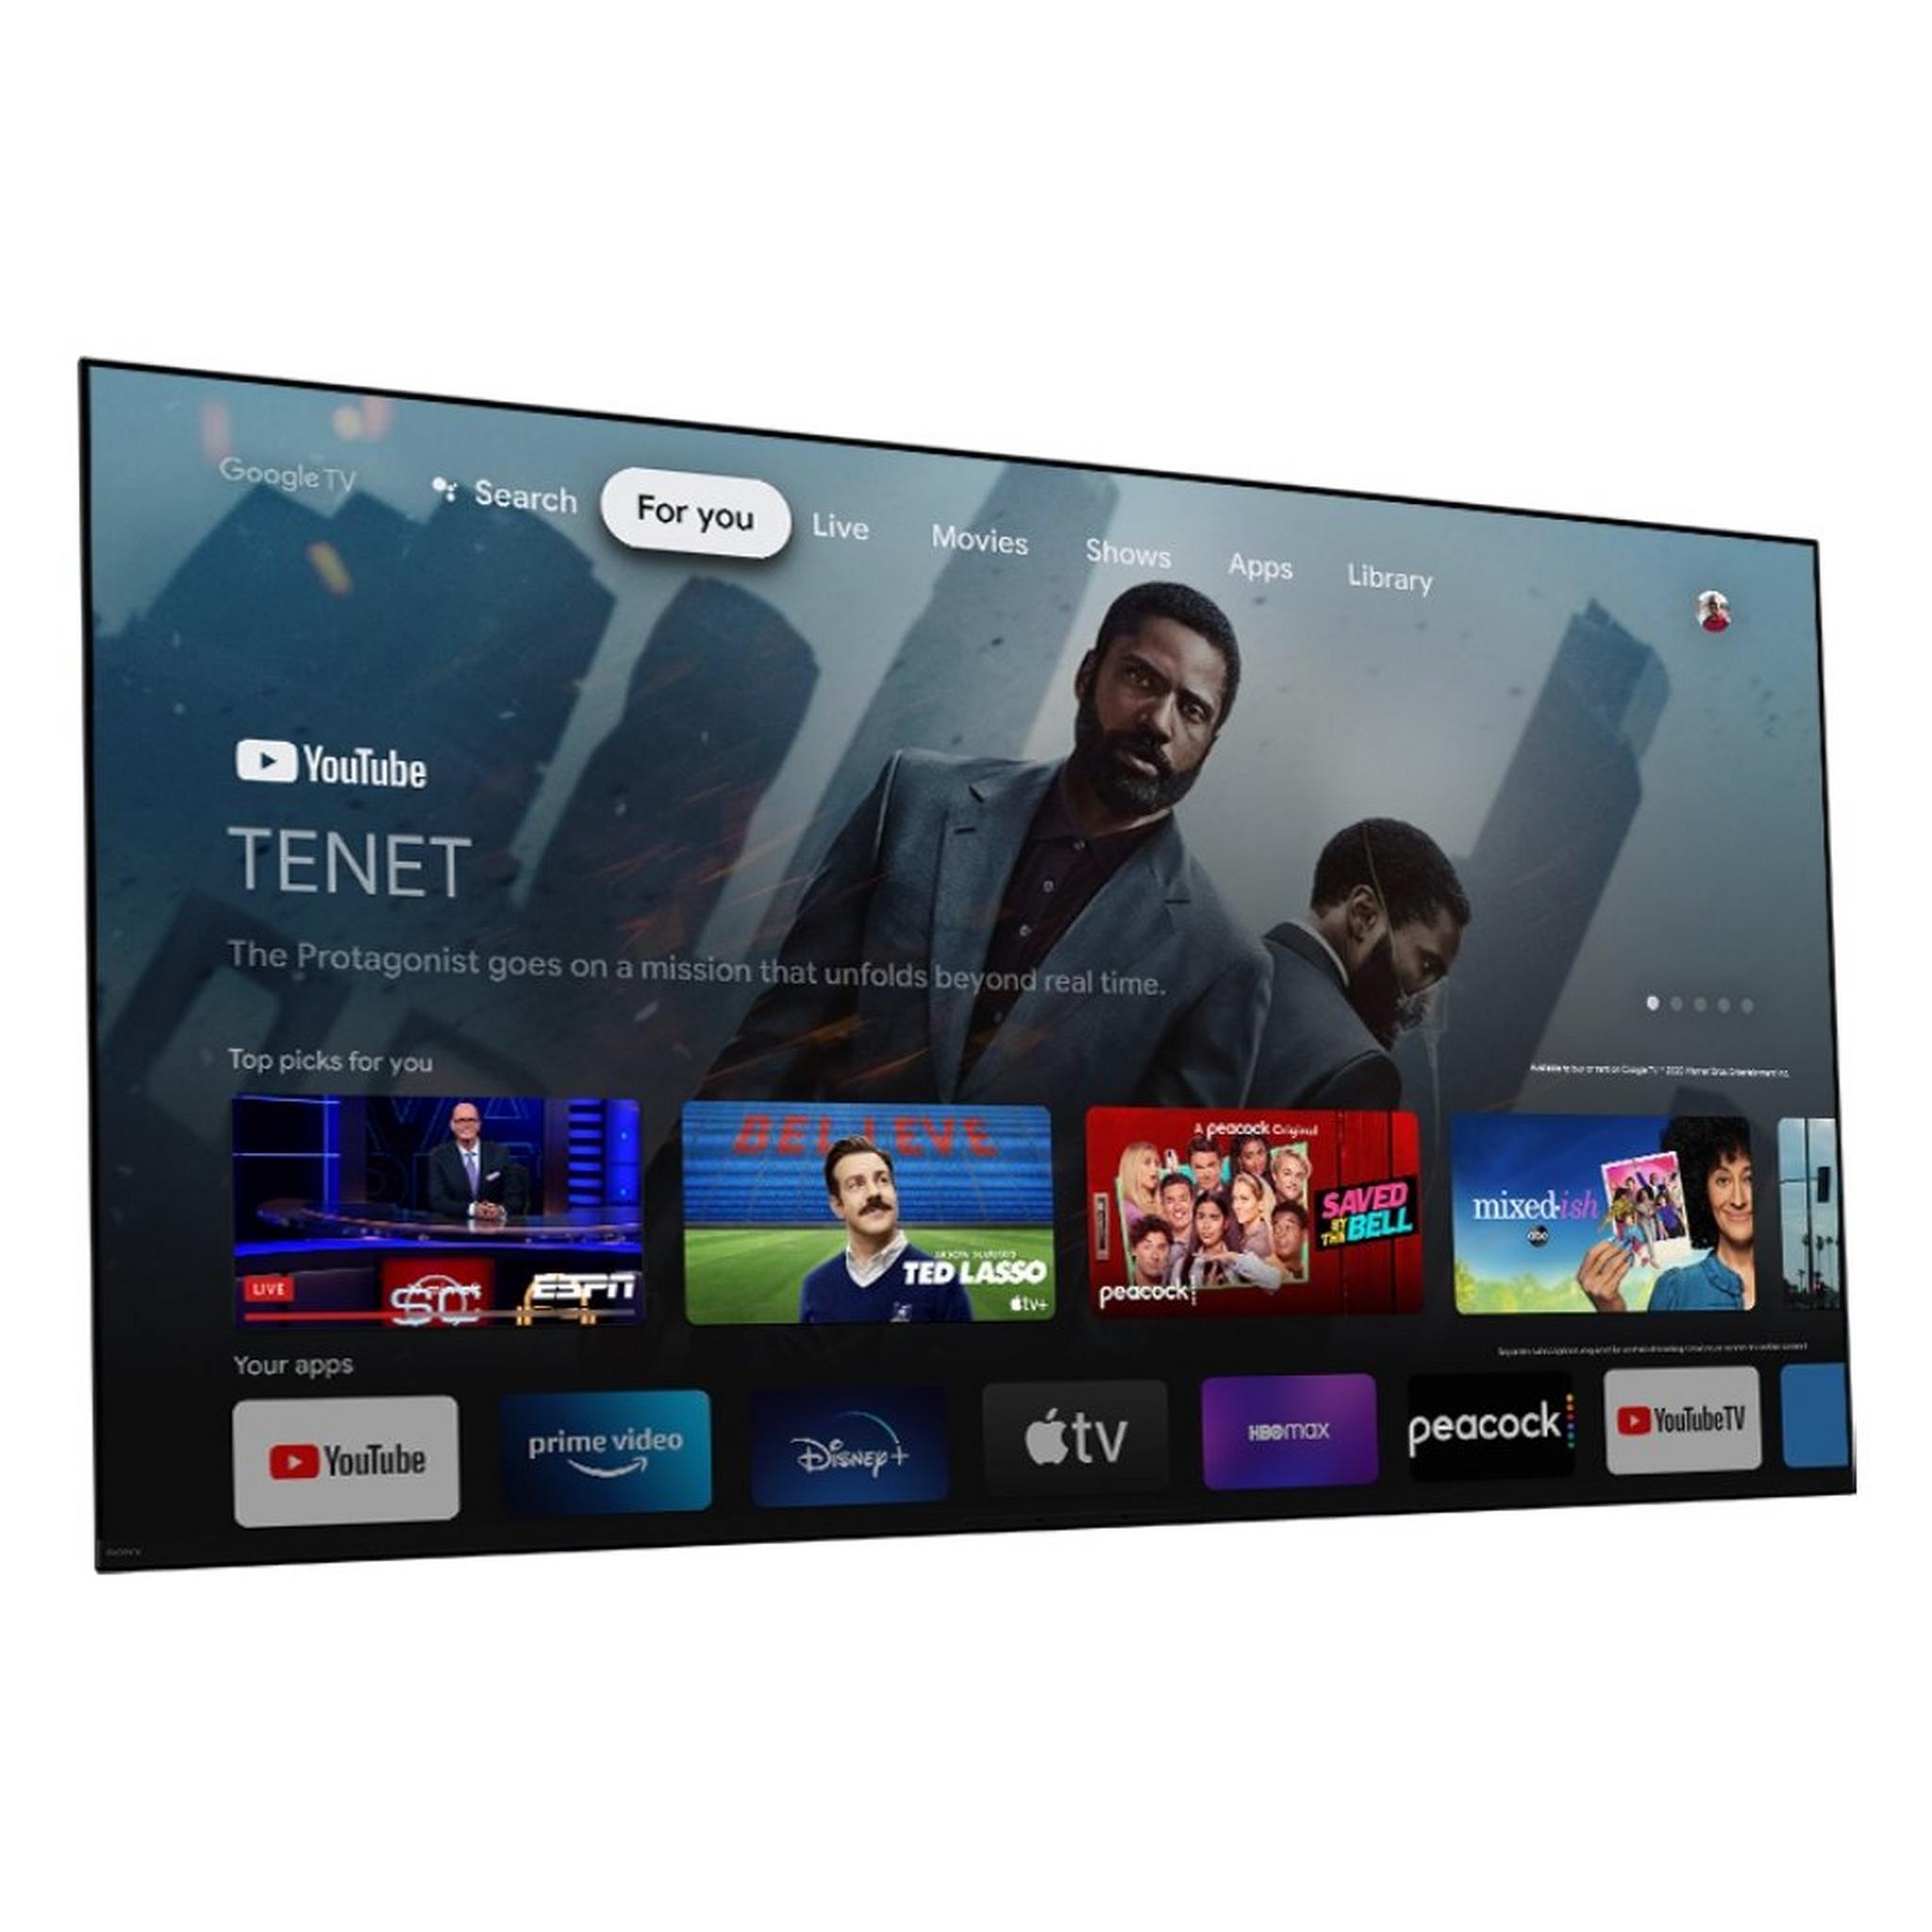 Sony 65-inch 4K OLED Android Smart TV, XR-65A95K - Black